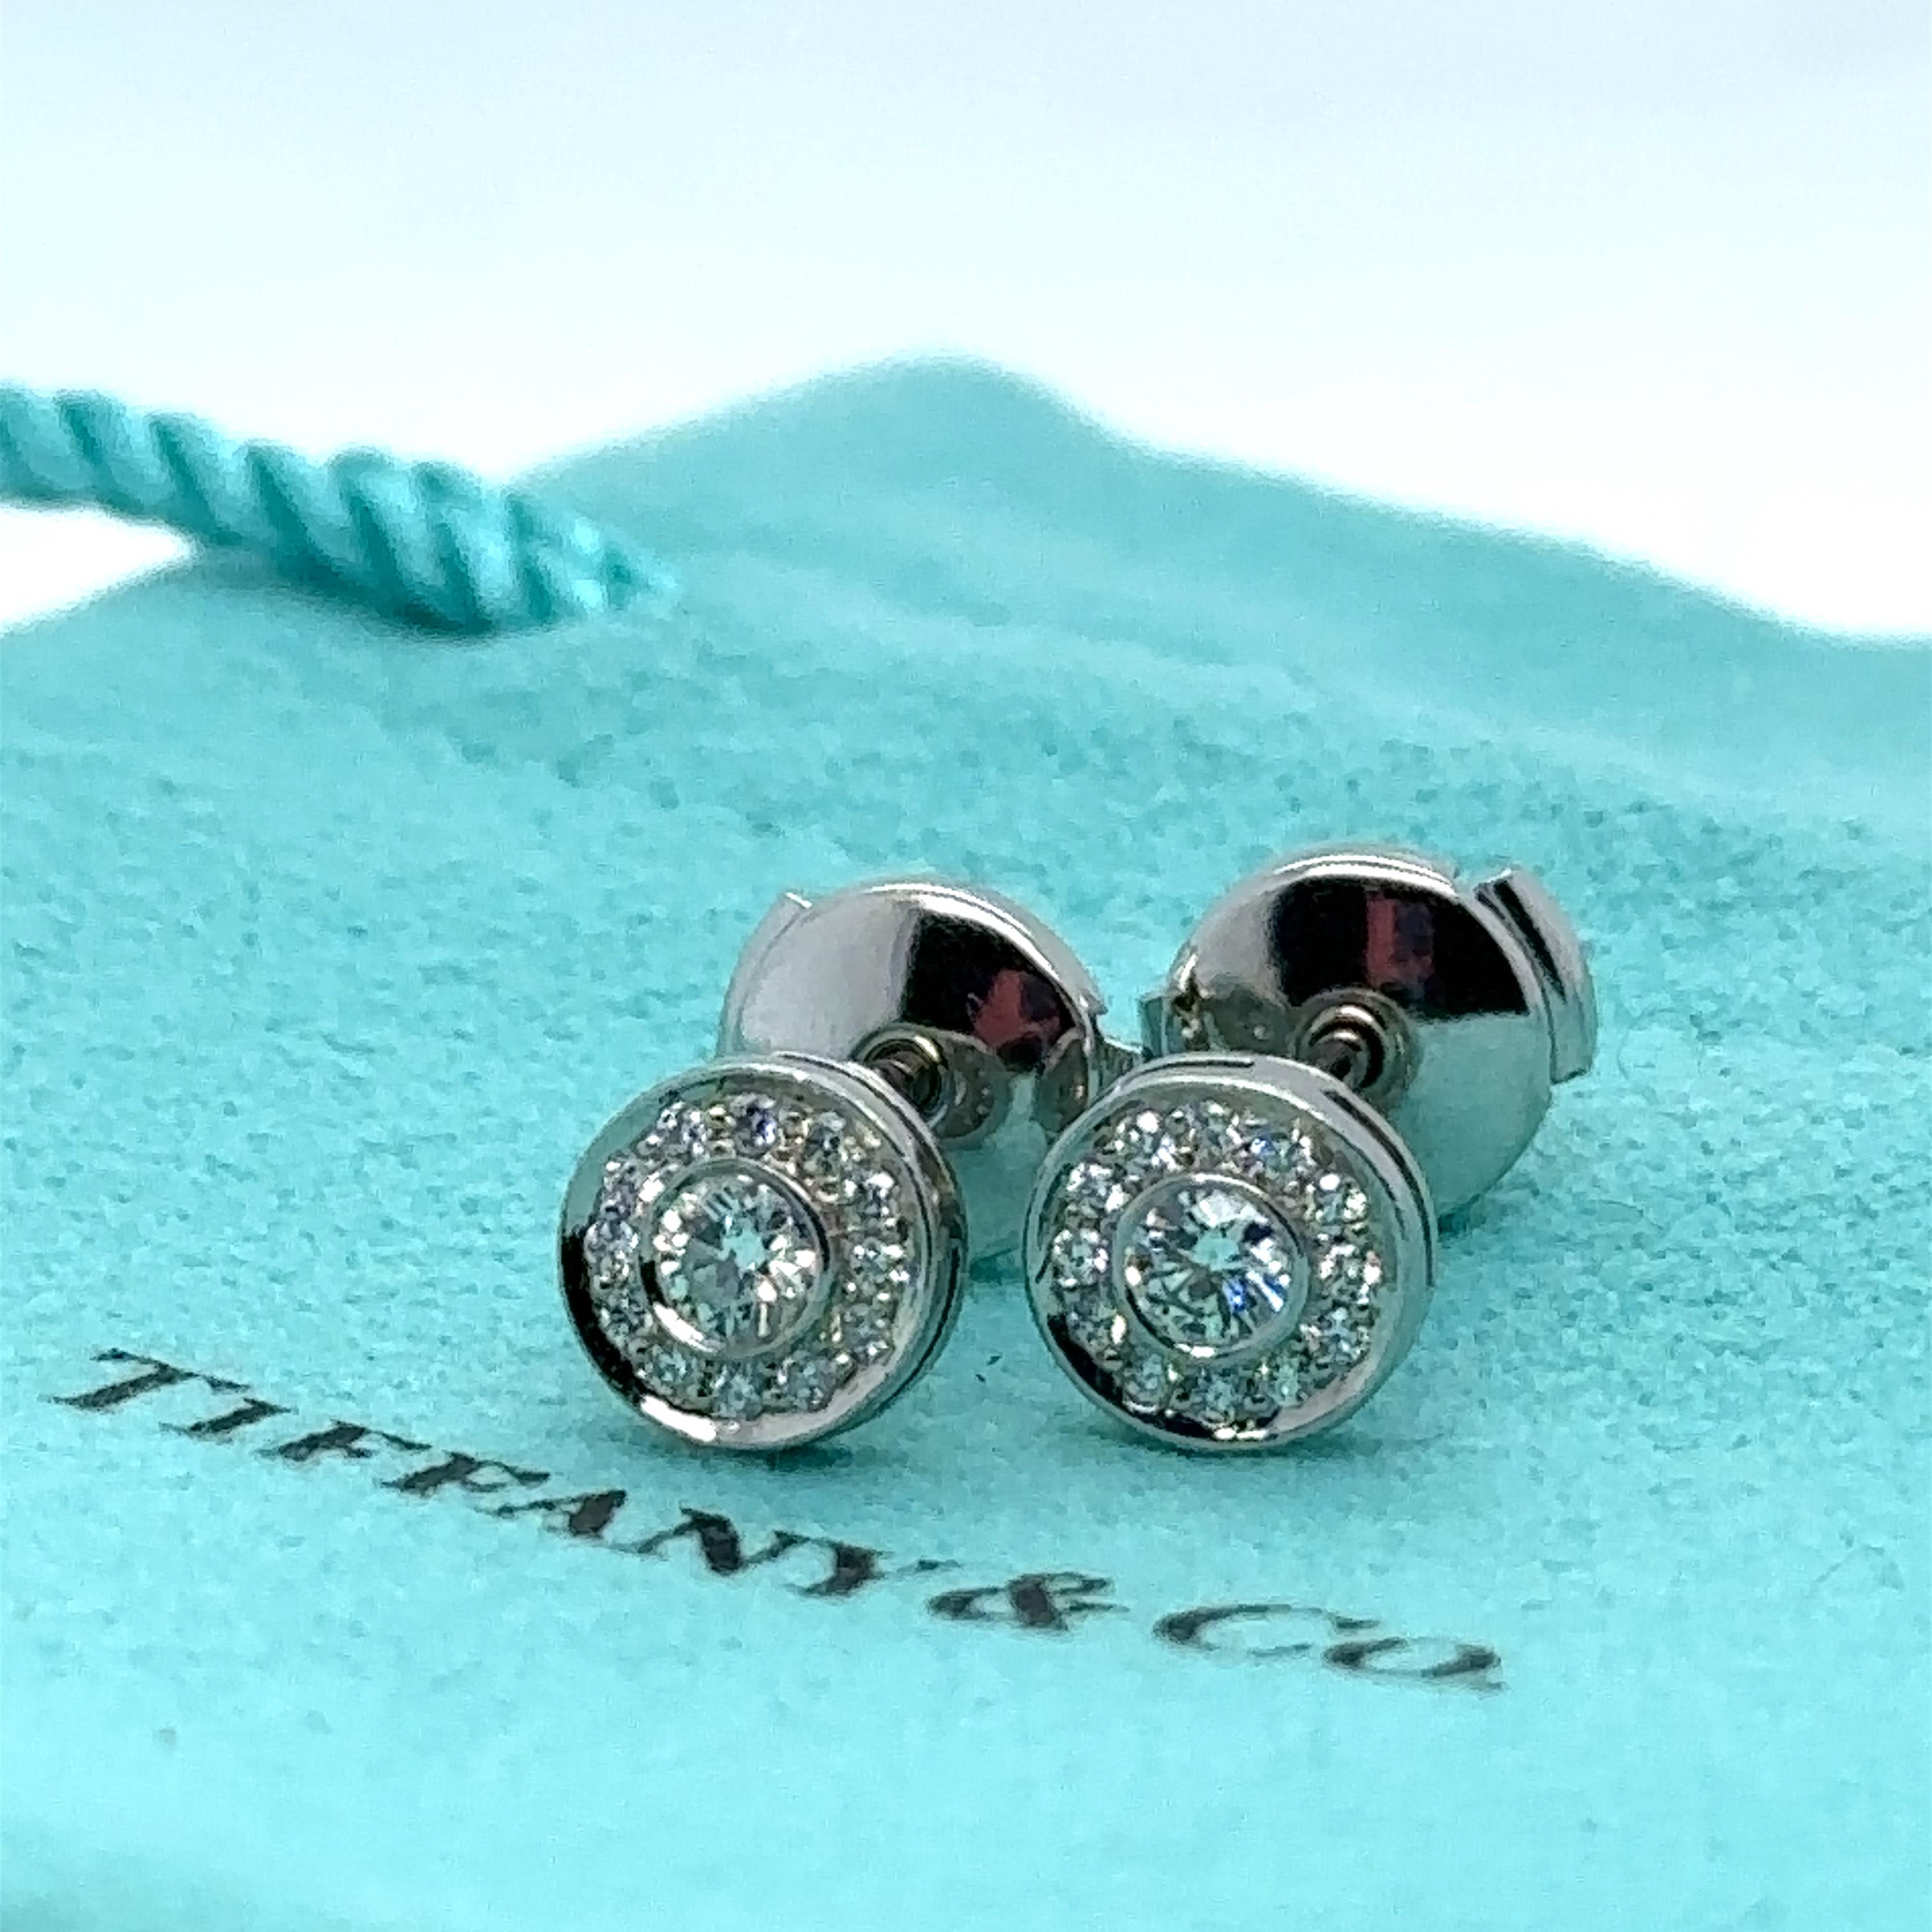 Tiffany & Co stud halo earrings, made of 950 Platinum with a weight of 2 grams.

Set with 26 round brilliant cut diamonds, approximately colour F and clarity VS with a total weight of 0.50ct

Metal: 950 Platinum
Carat: 0.50ct
Colour: F
Clarity: 